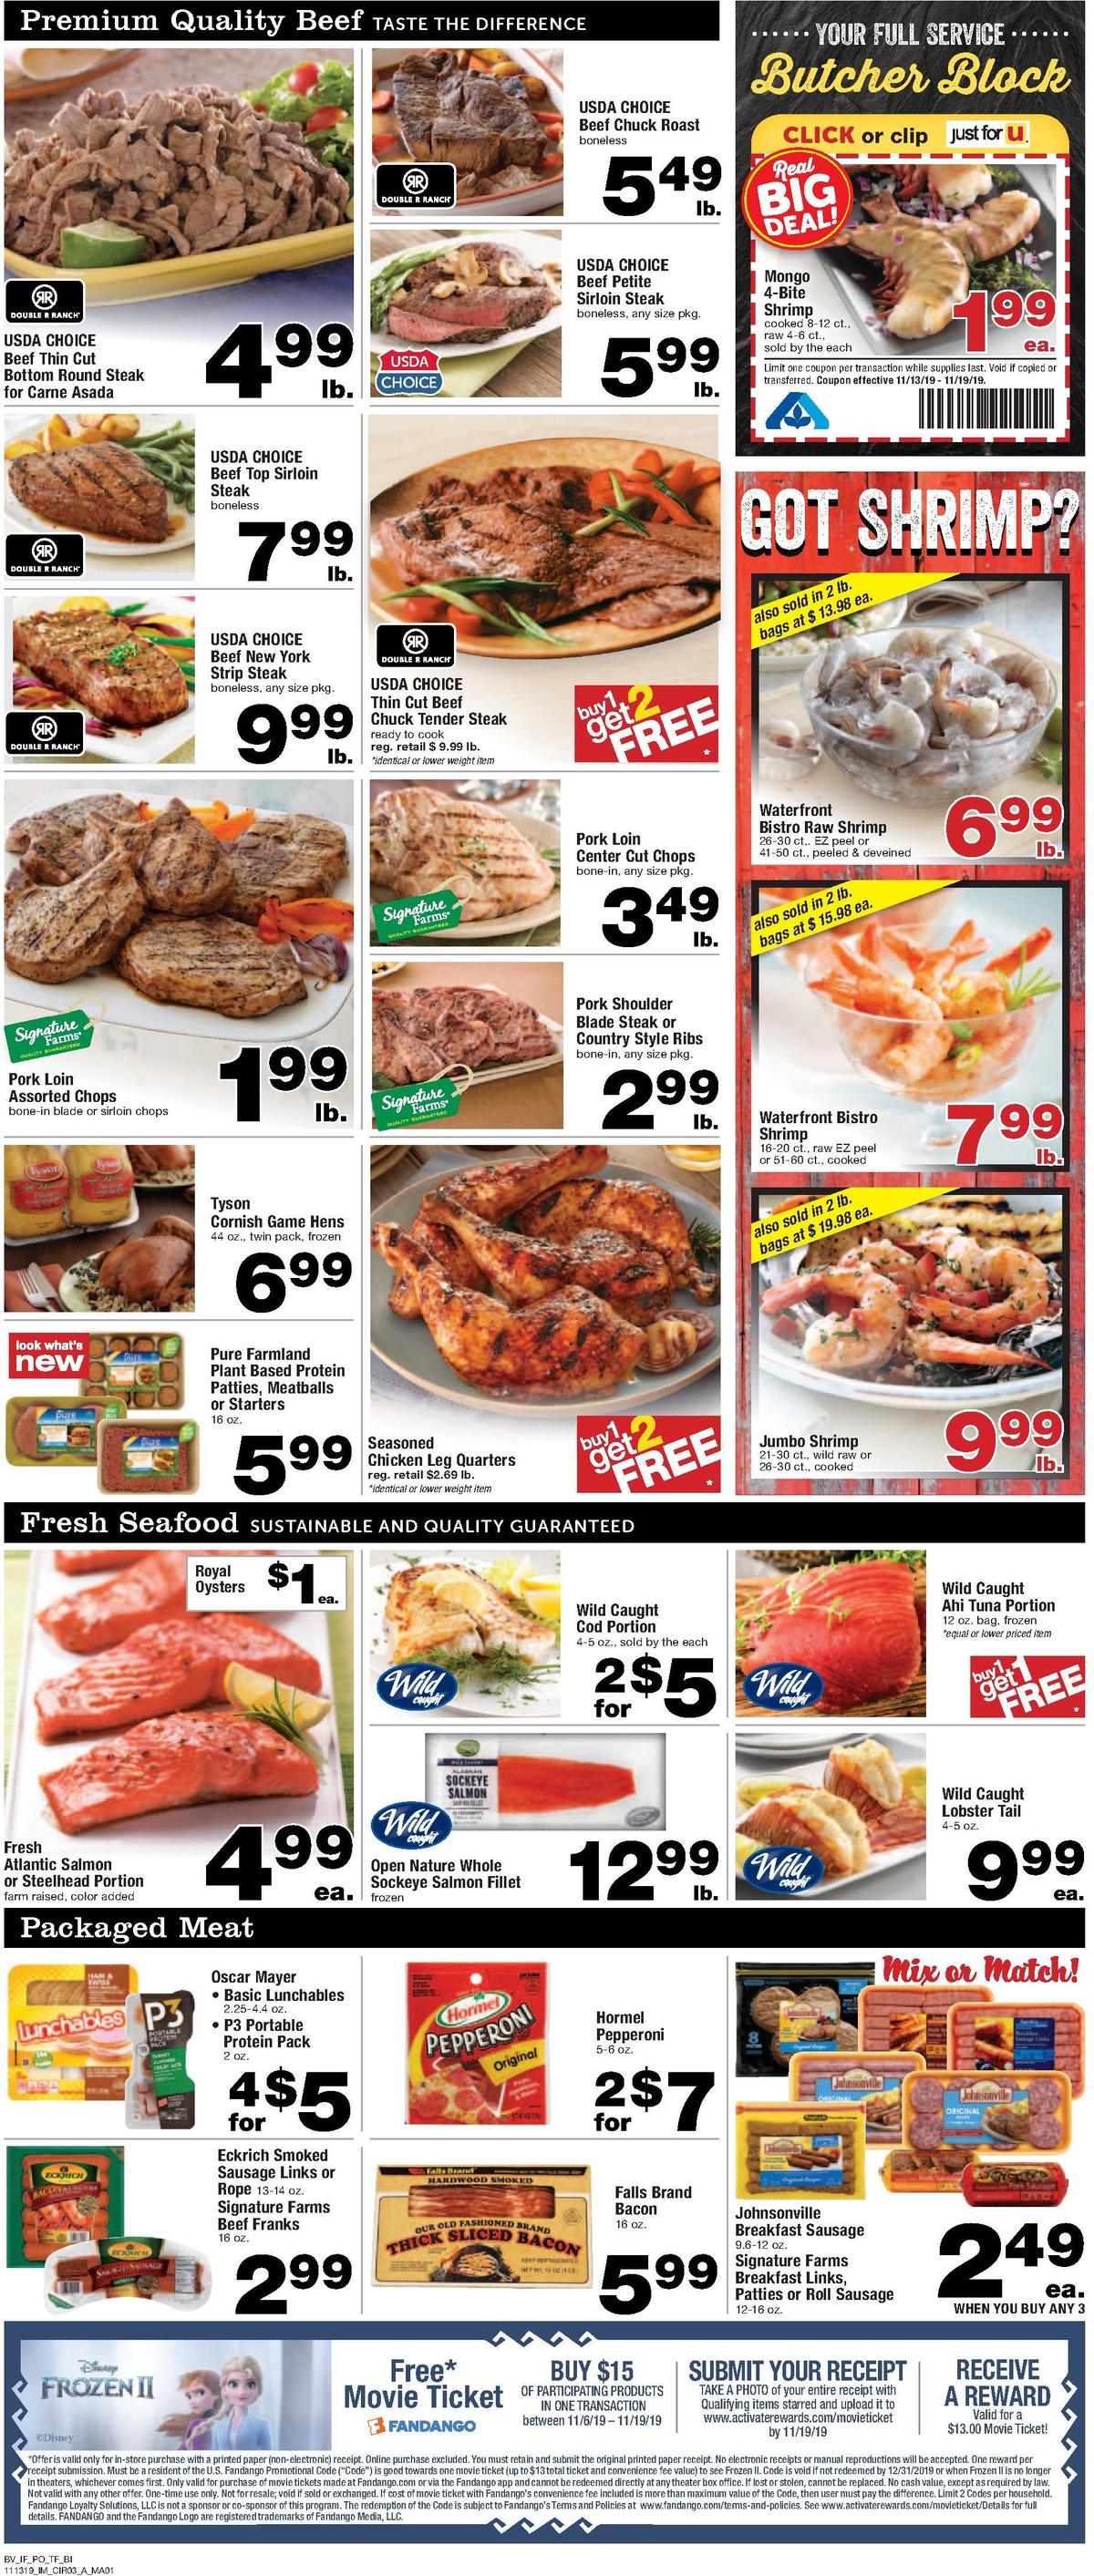 Albertsons Weekly Ad from November 13